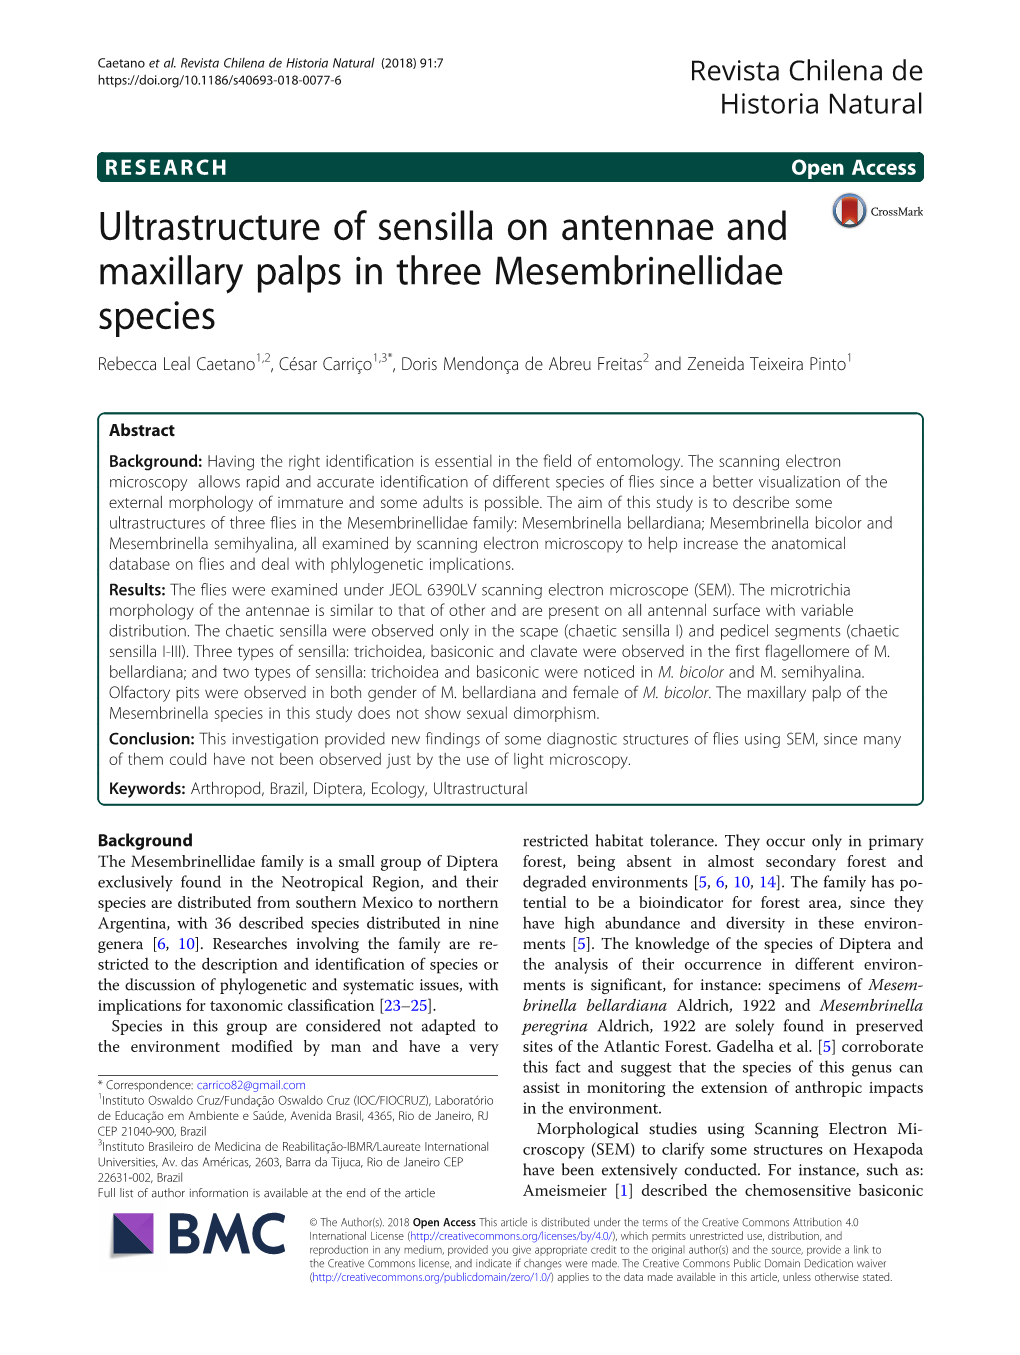 Ultrastructure of Sensilla on Antennae and Maxillary Palps in Three Mesembrinellidae Species